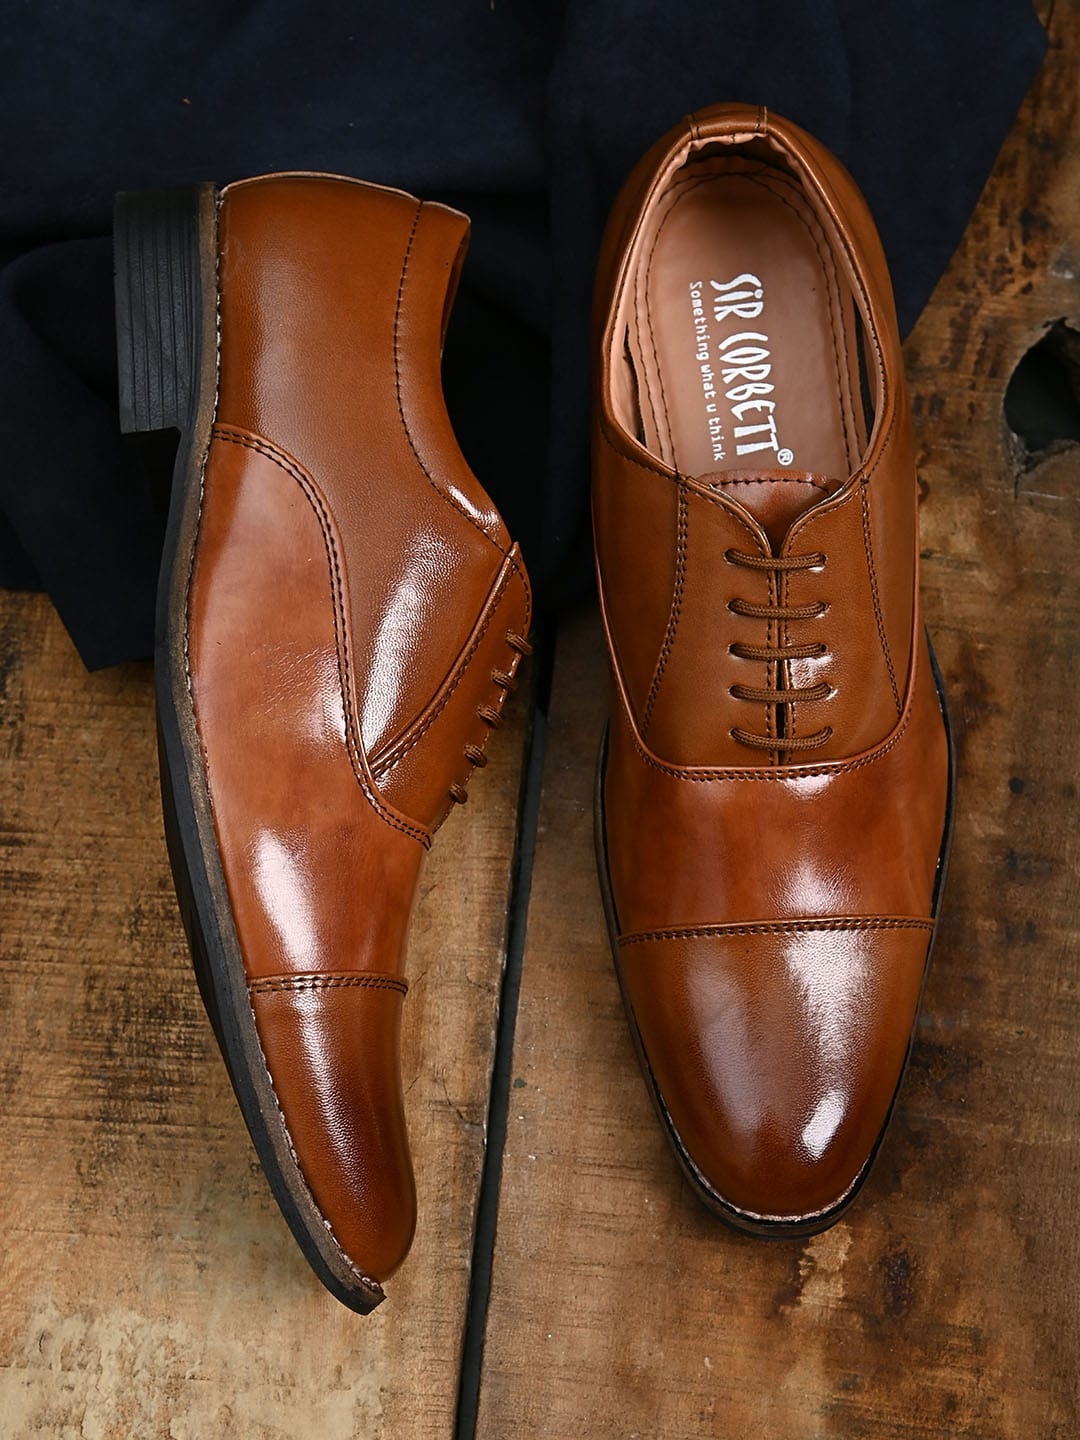 Buy FAUSTO Formal Shoes online - Men - 315 products | FASHIOLA.in